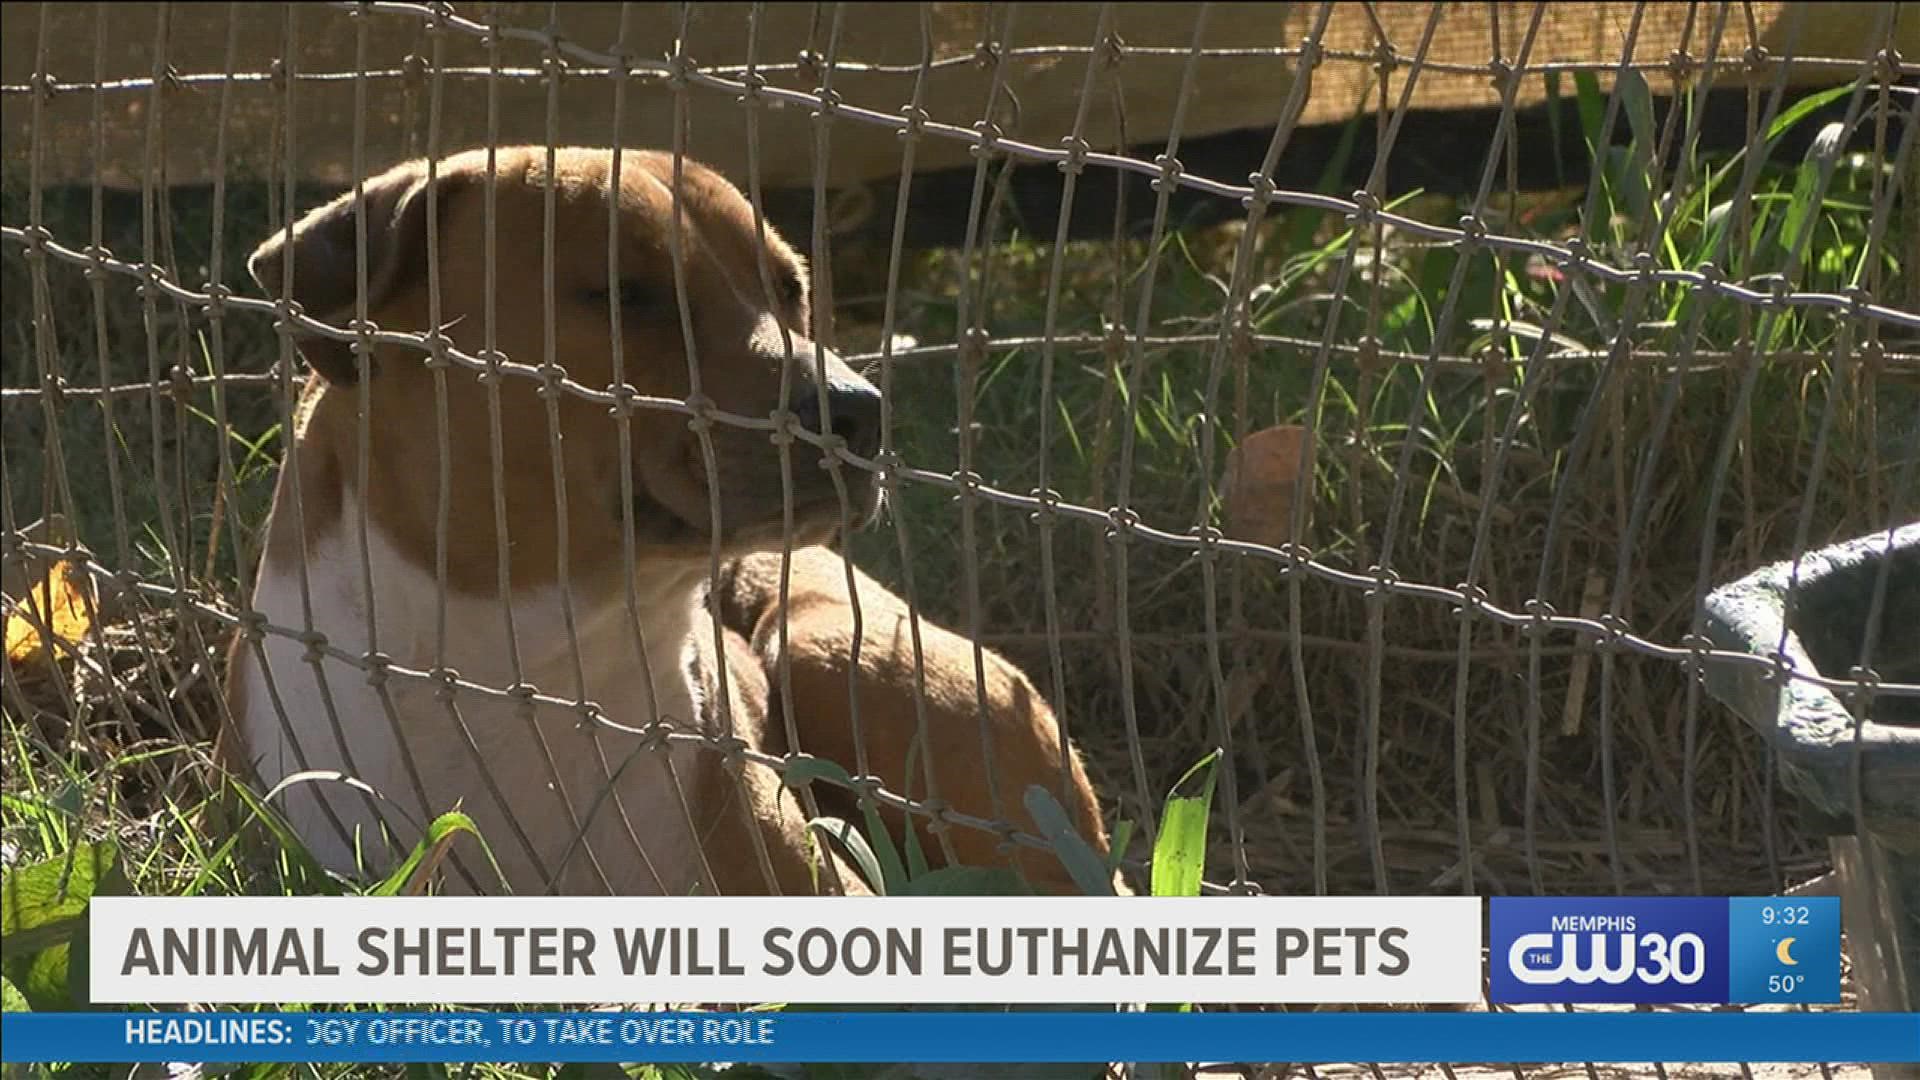 The shelter was built to hold 40 dogs, but they recently have been averaging 80 dogs a day.